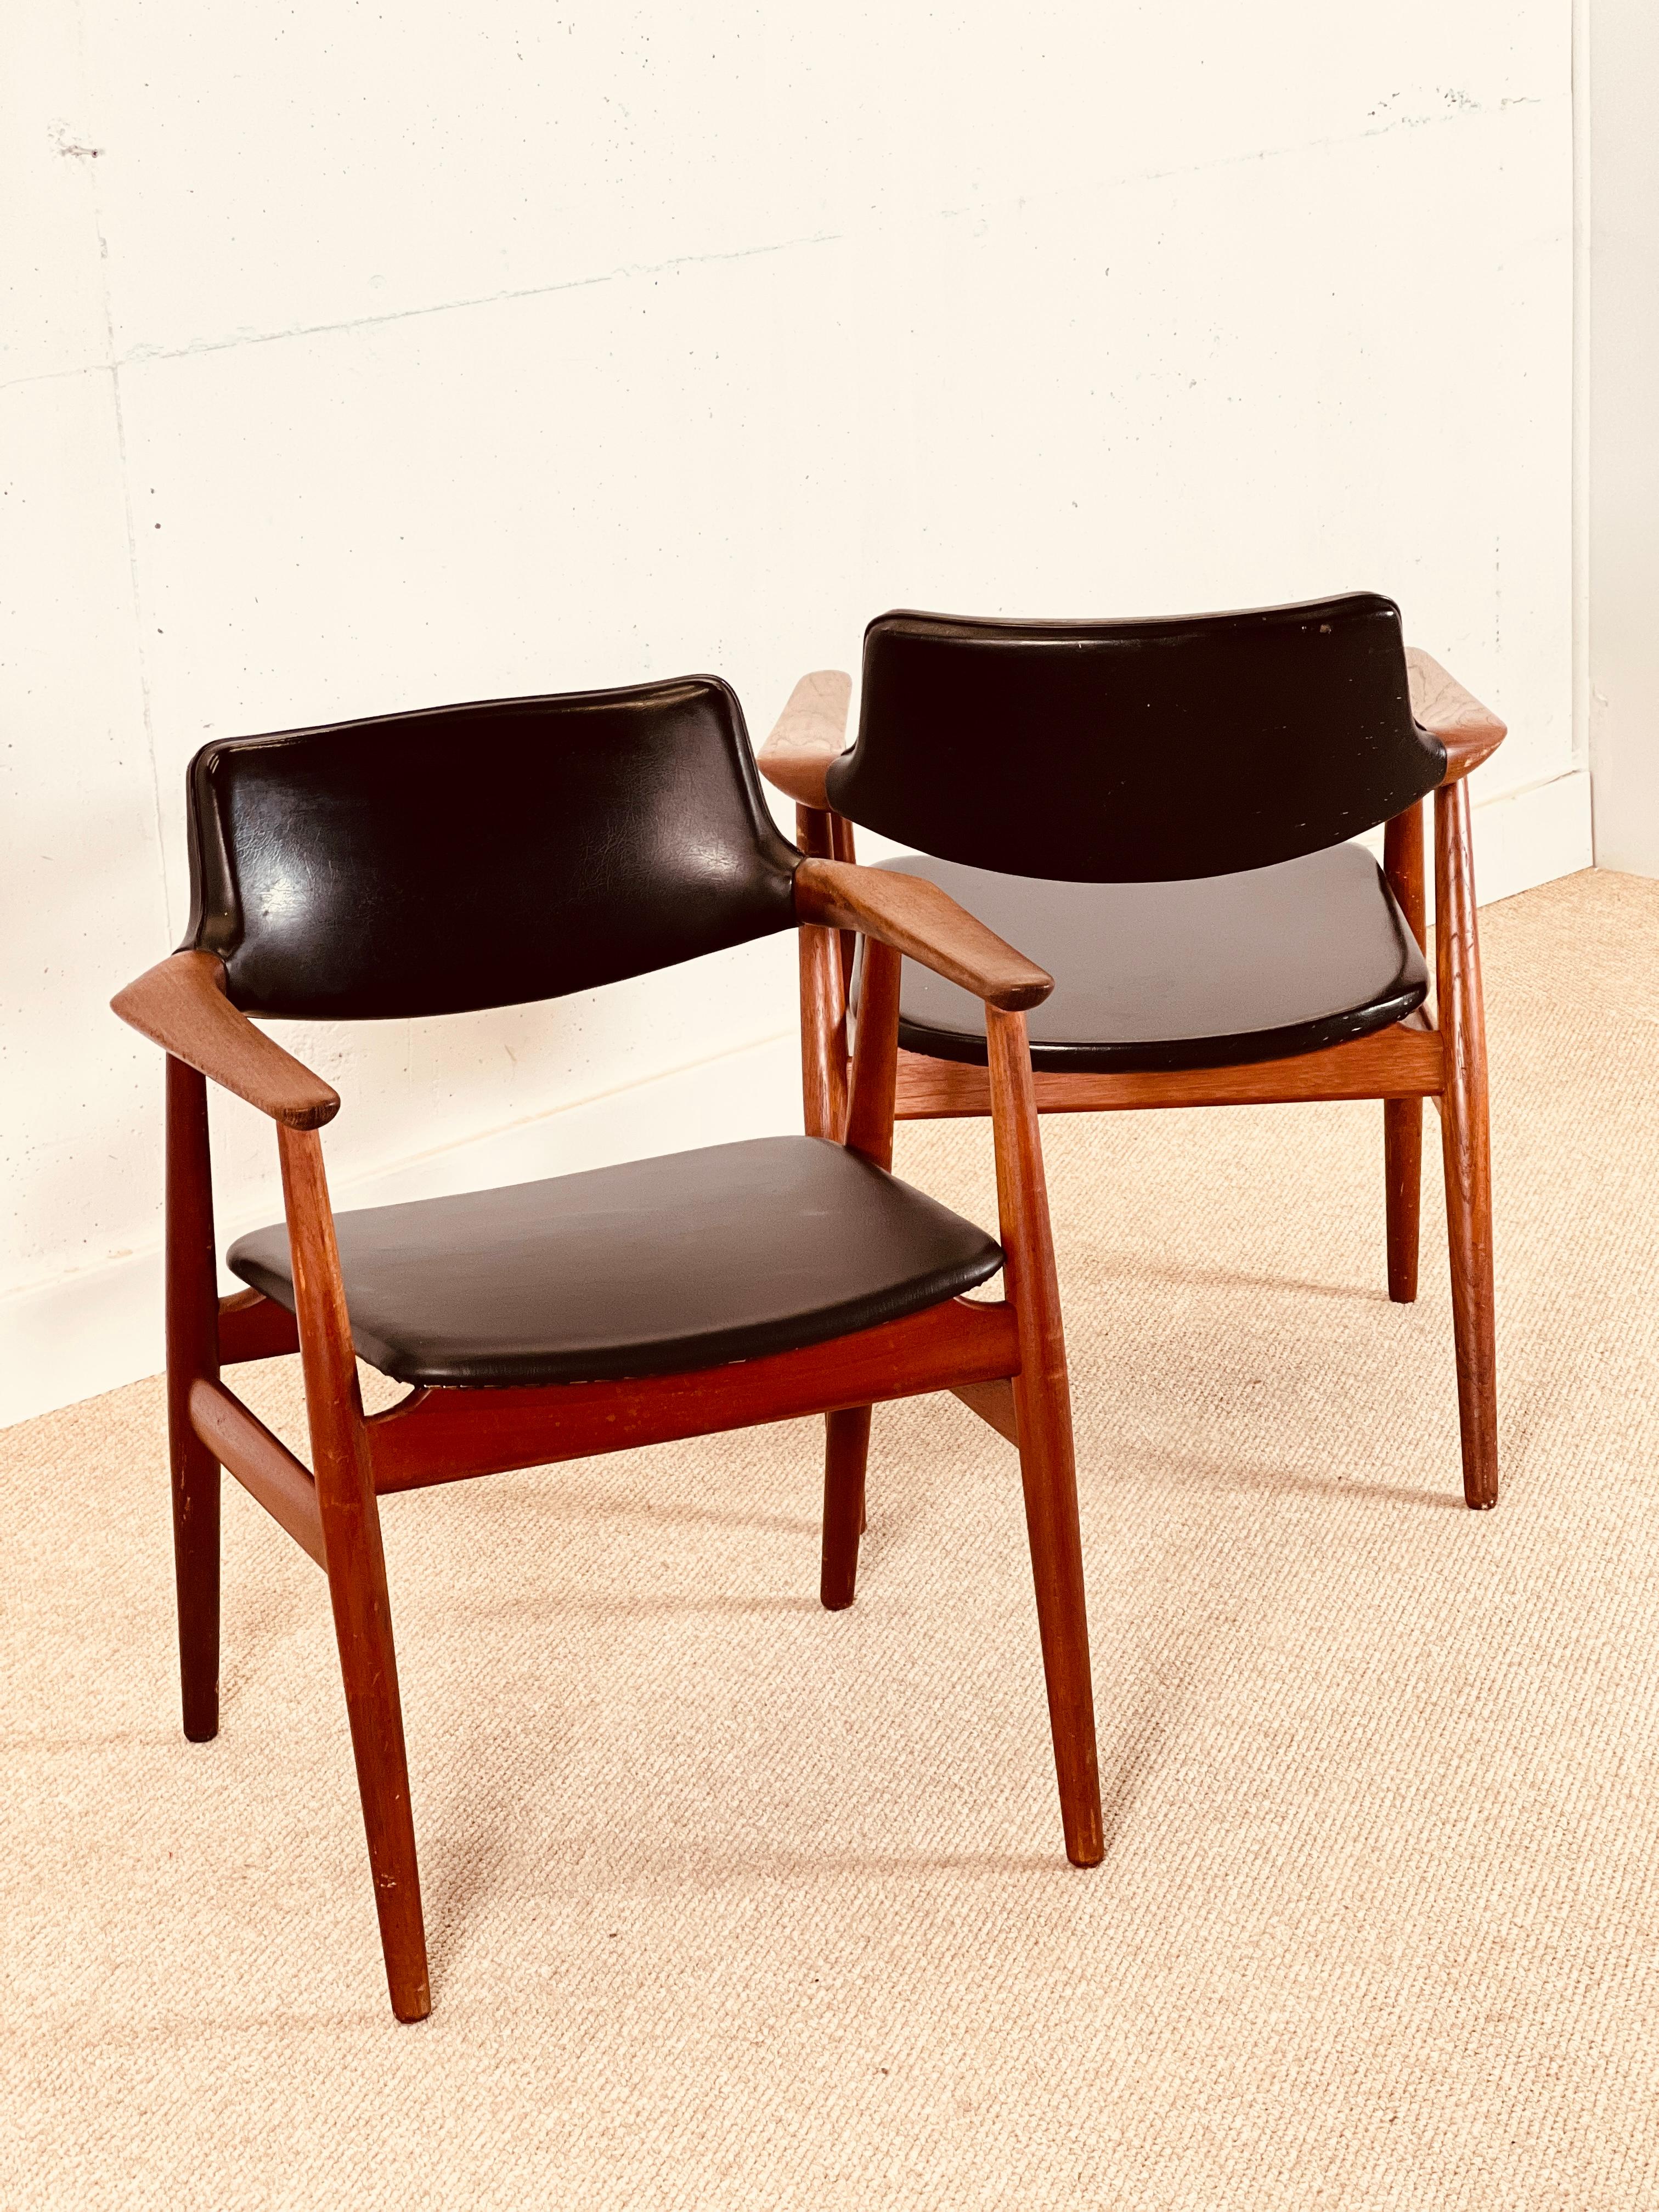 Danish A Set Of Four or six Svend Aage Eriksen Dining Room Chair Model Gm11, 1960 For Sale